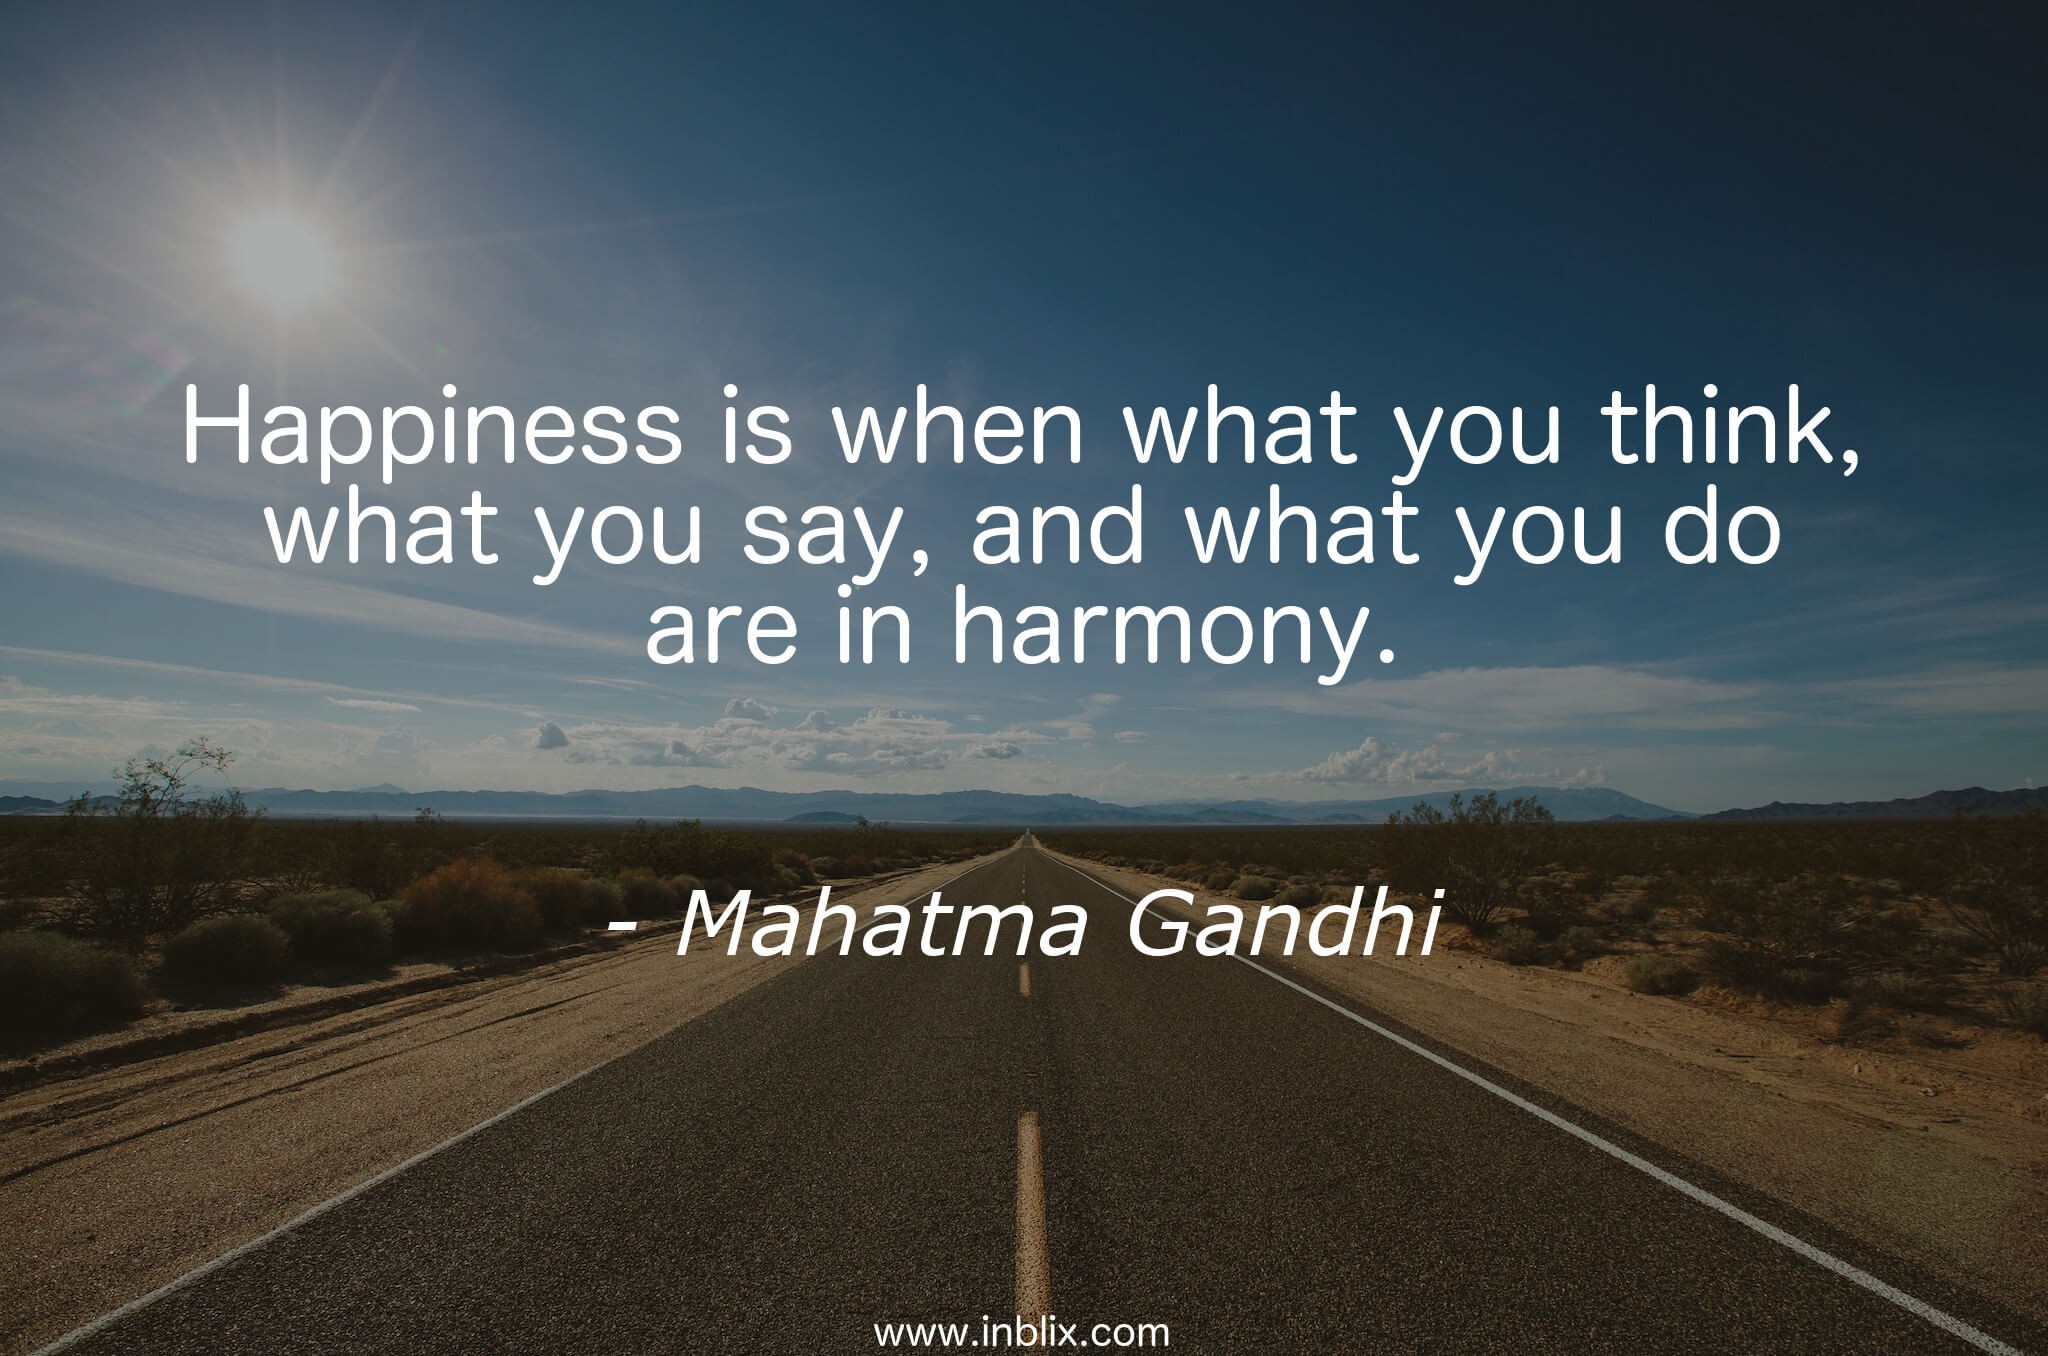 When you are near. When are you Happy. Happiness is when what you think, what you say, and what you do are in Harmony. Happiness is when you are understood. What is Happiness for you.